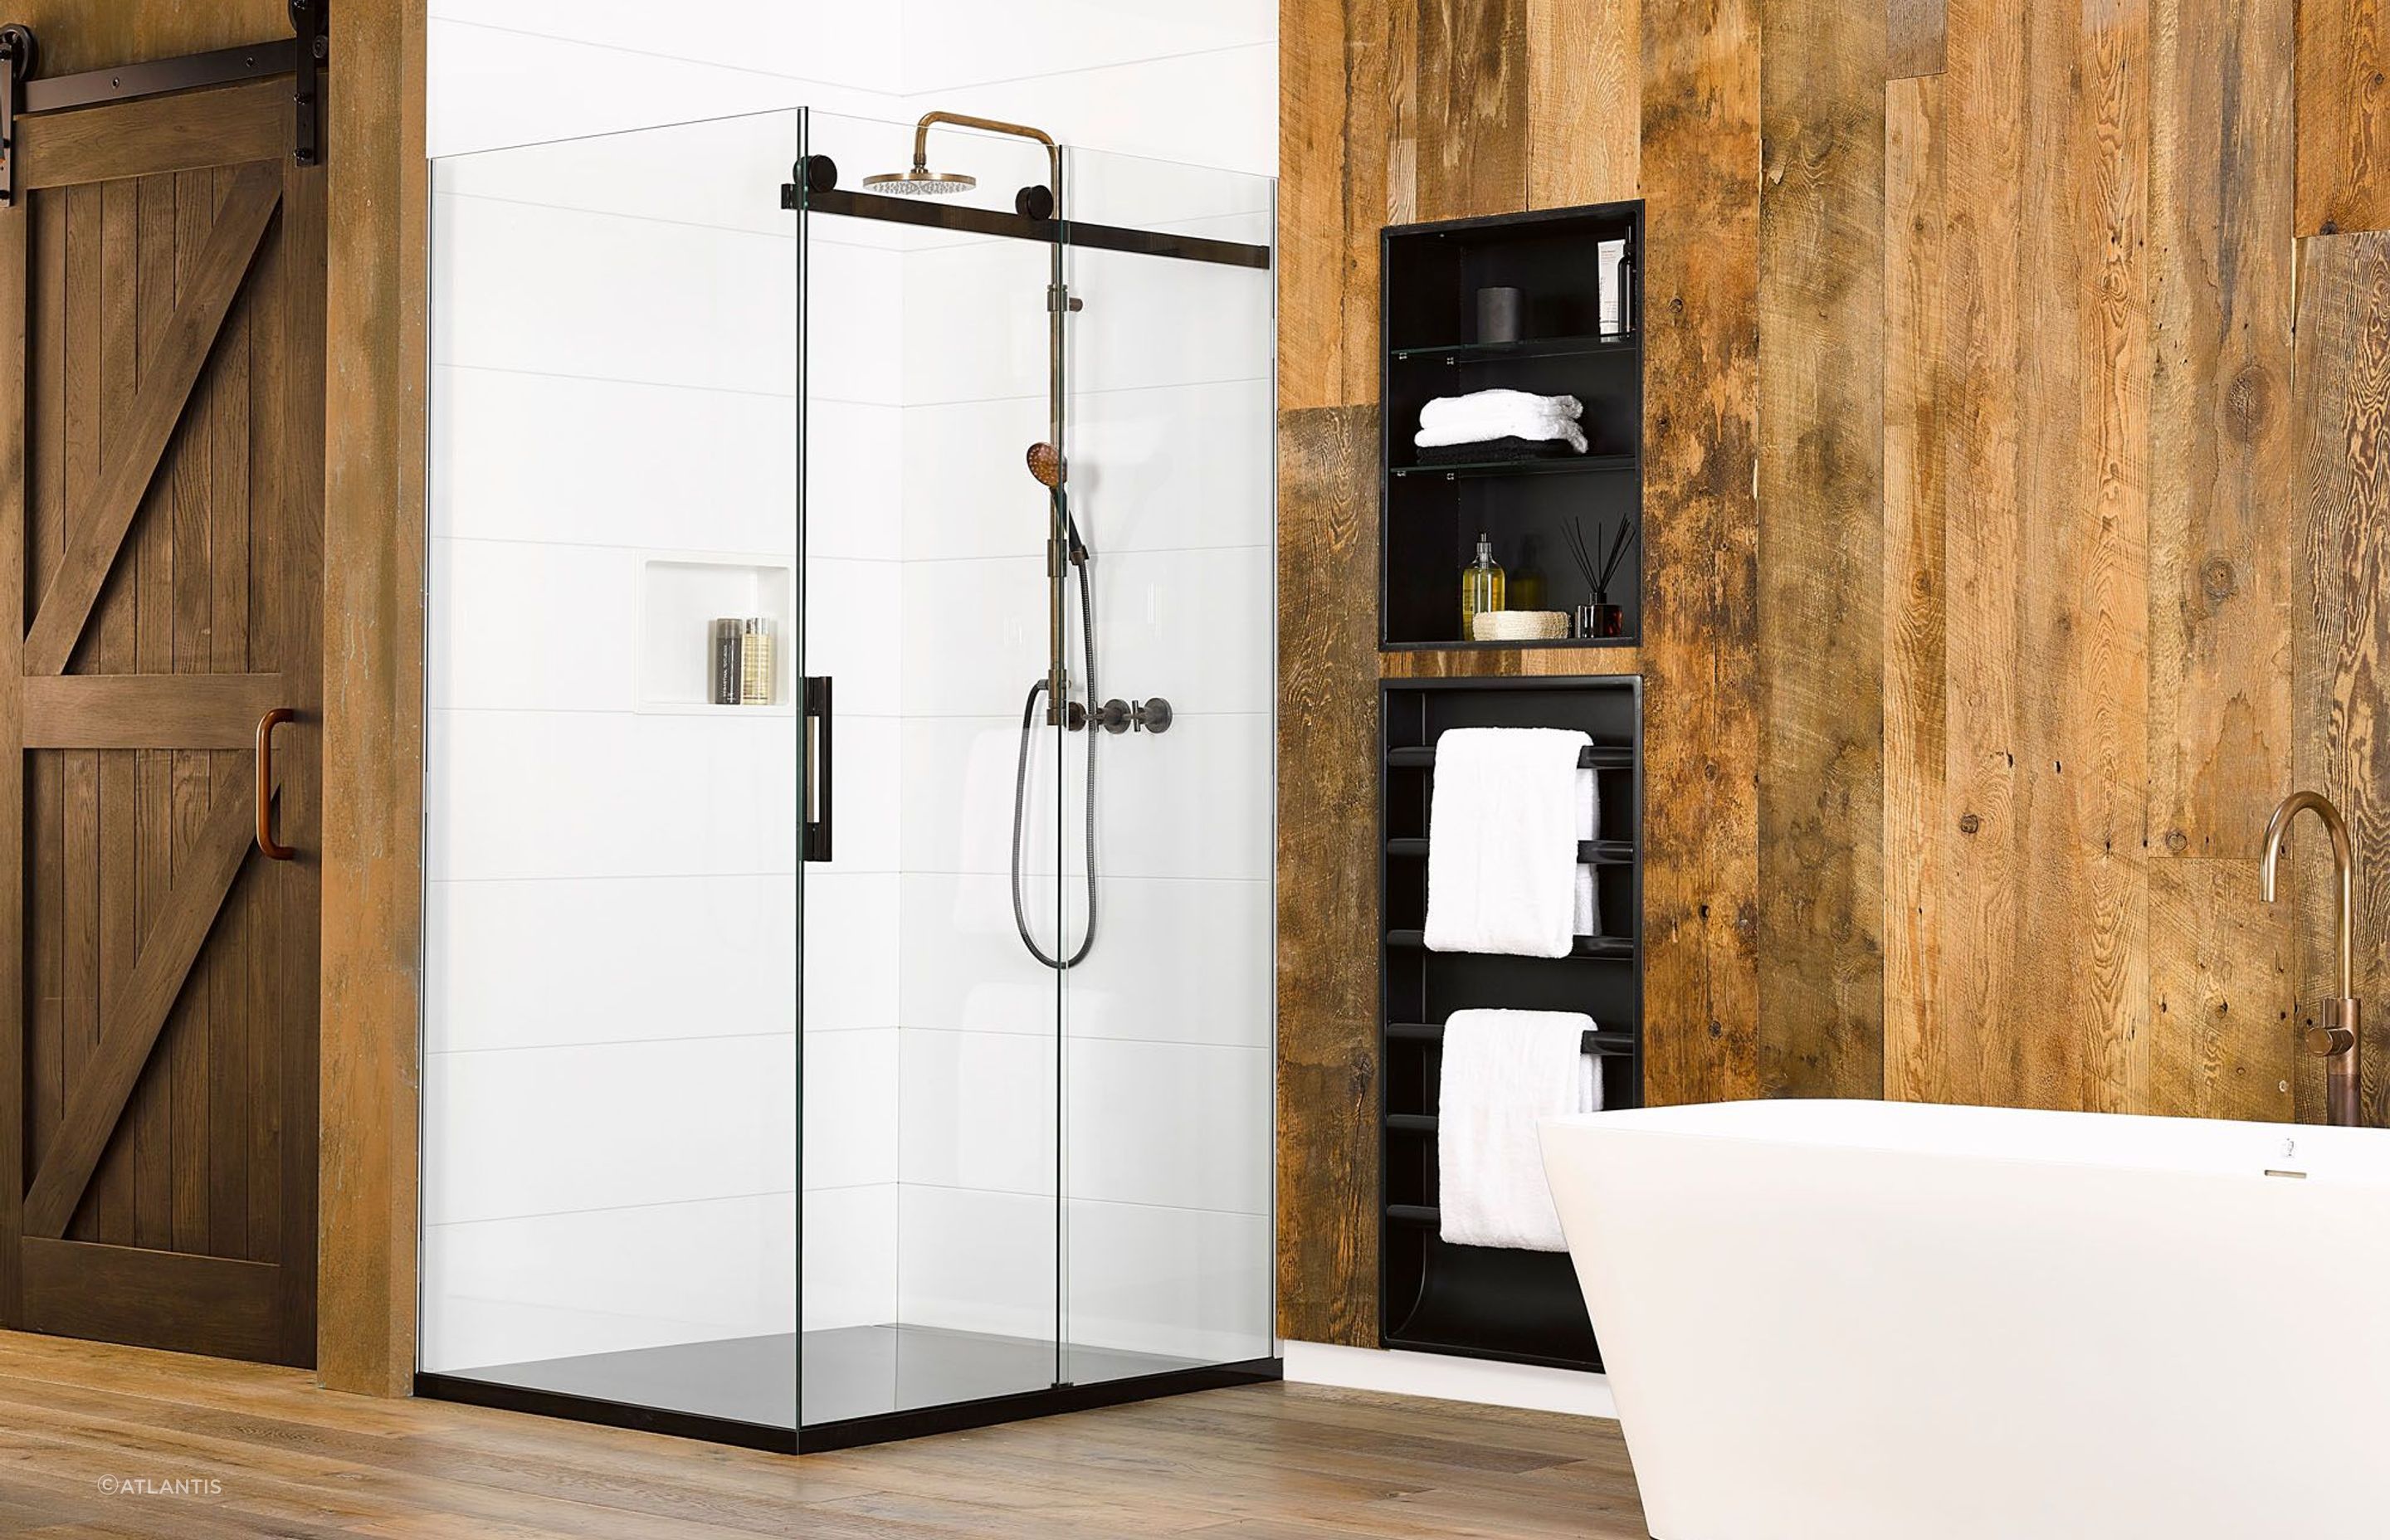 Shower and bath, side by side, featuring the The Ebony &amp; Ivory Renaissance Collection